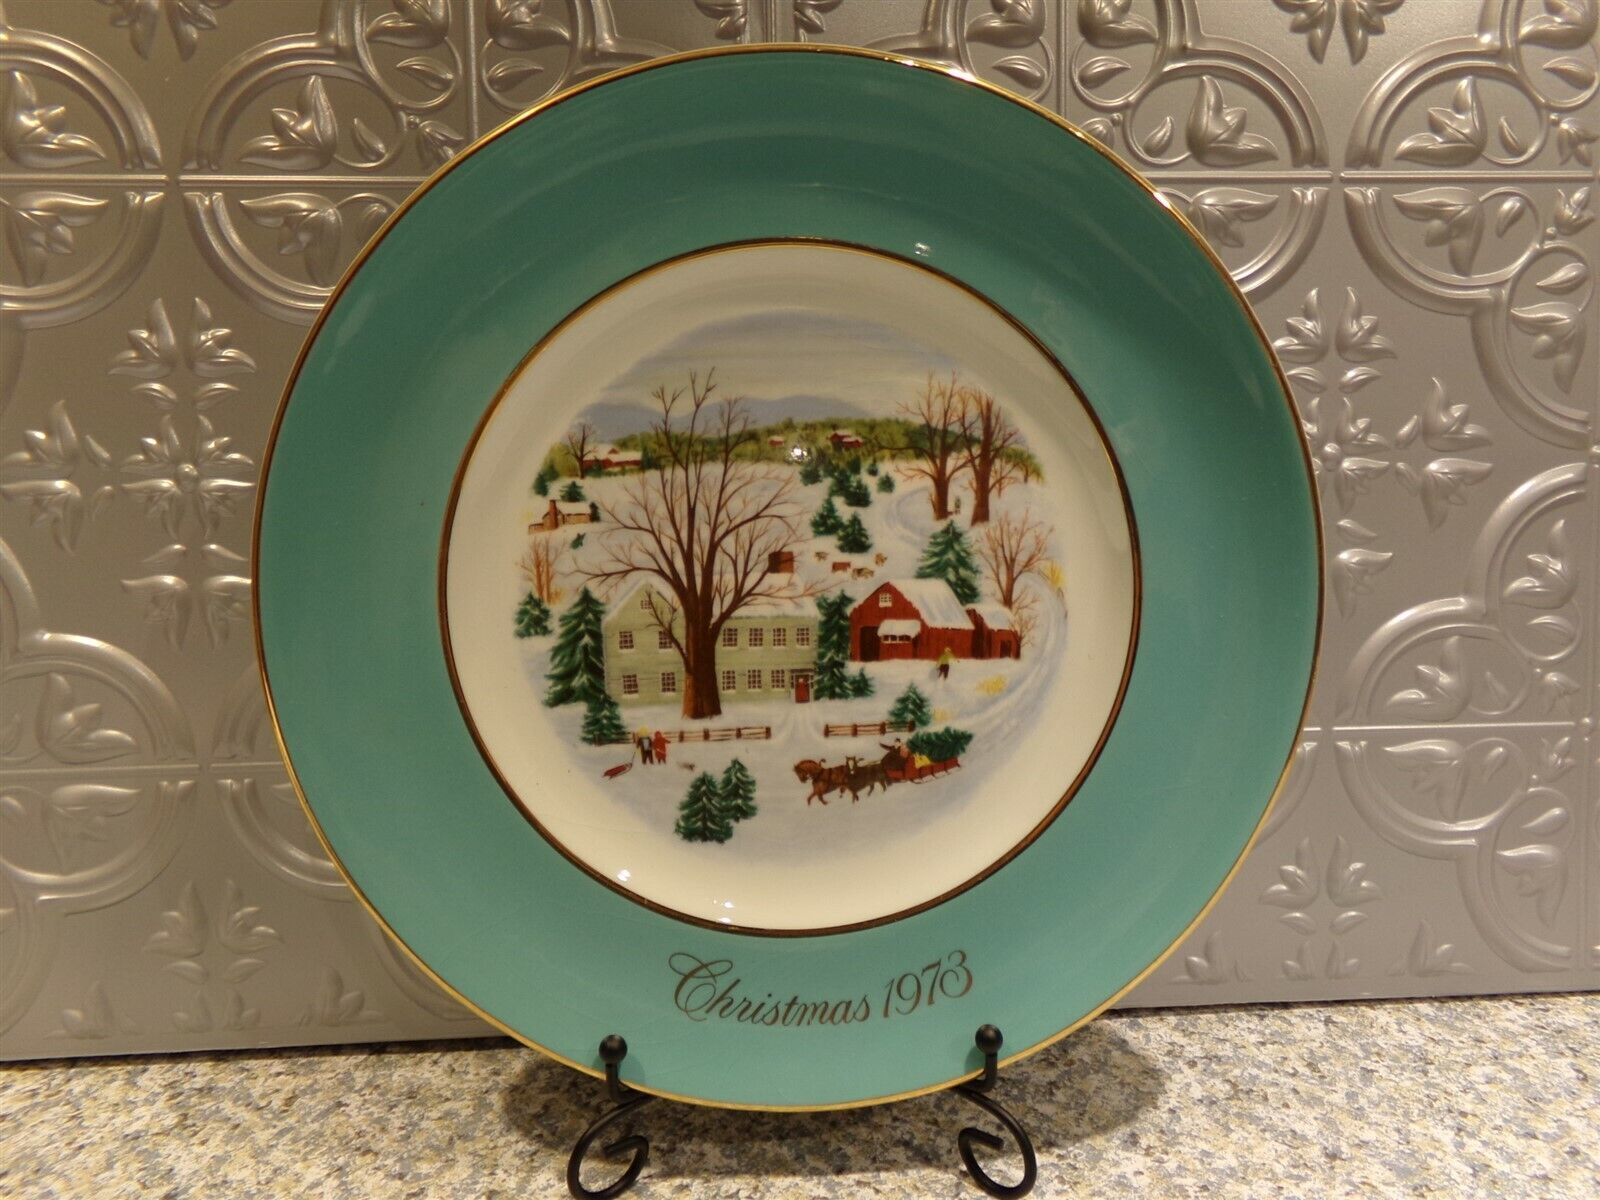 Primary image for Christmas on the Farm 1973 Avon Collector Plate by Enoch Wedgwood 